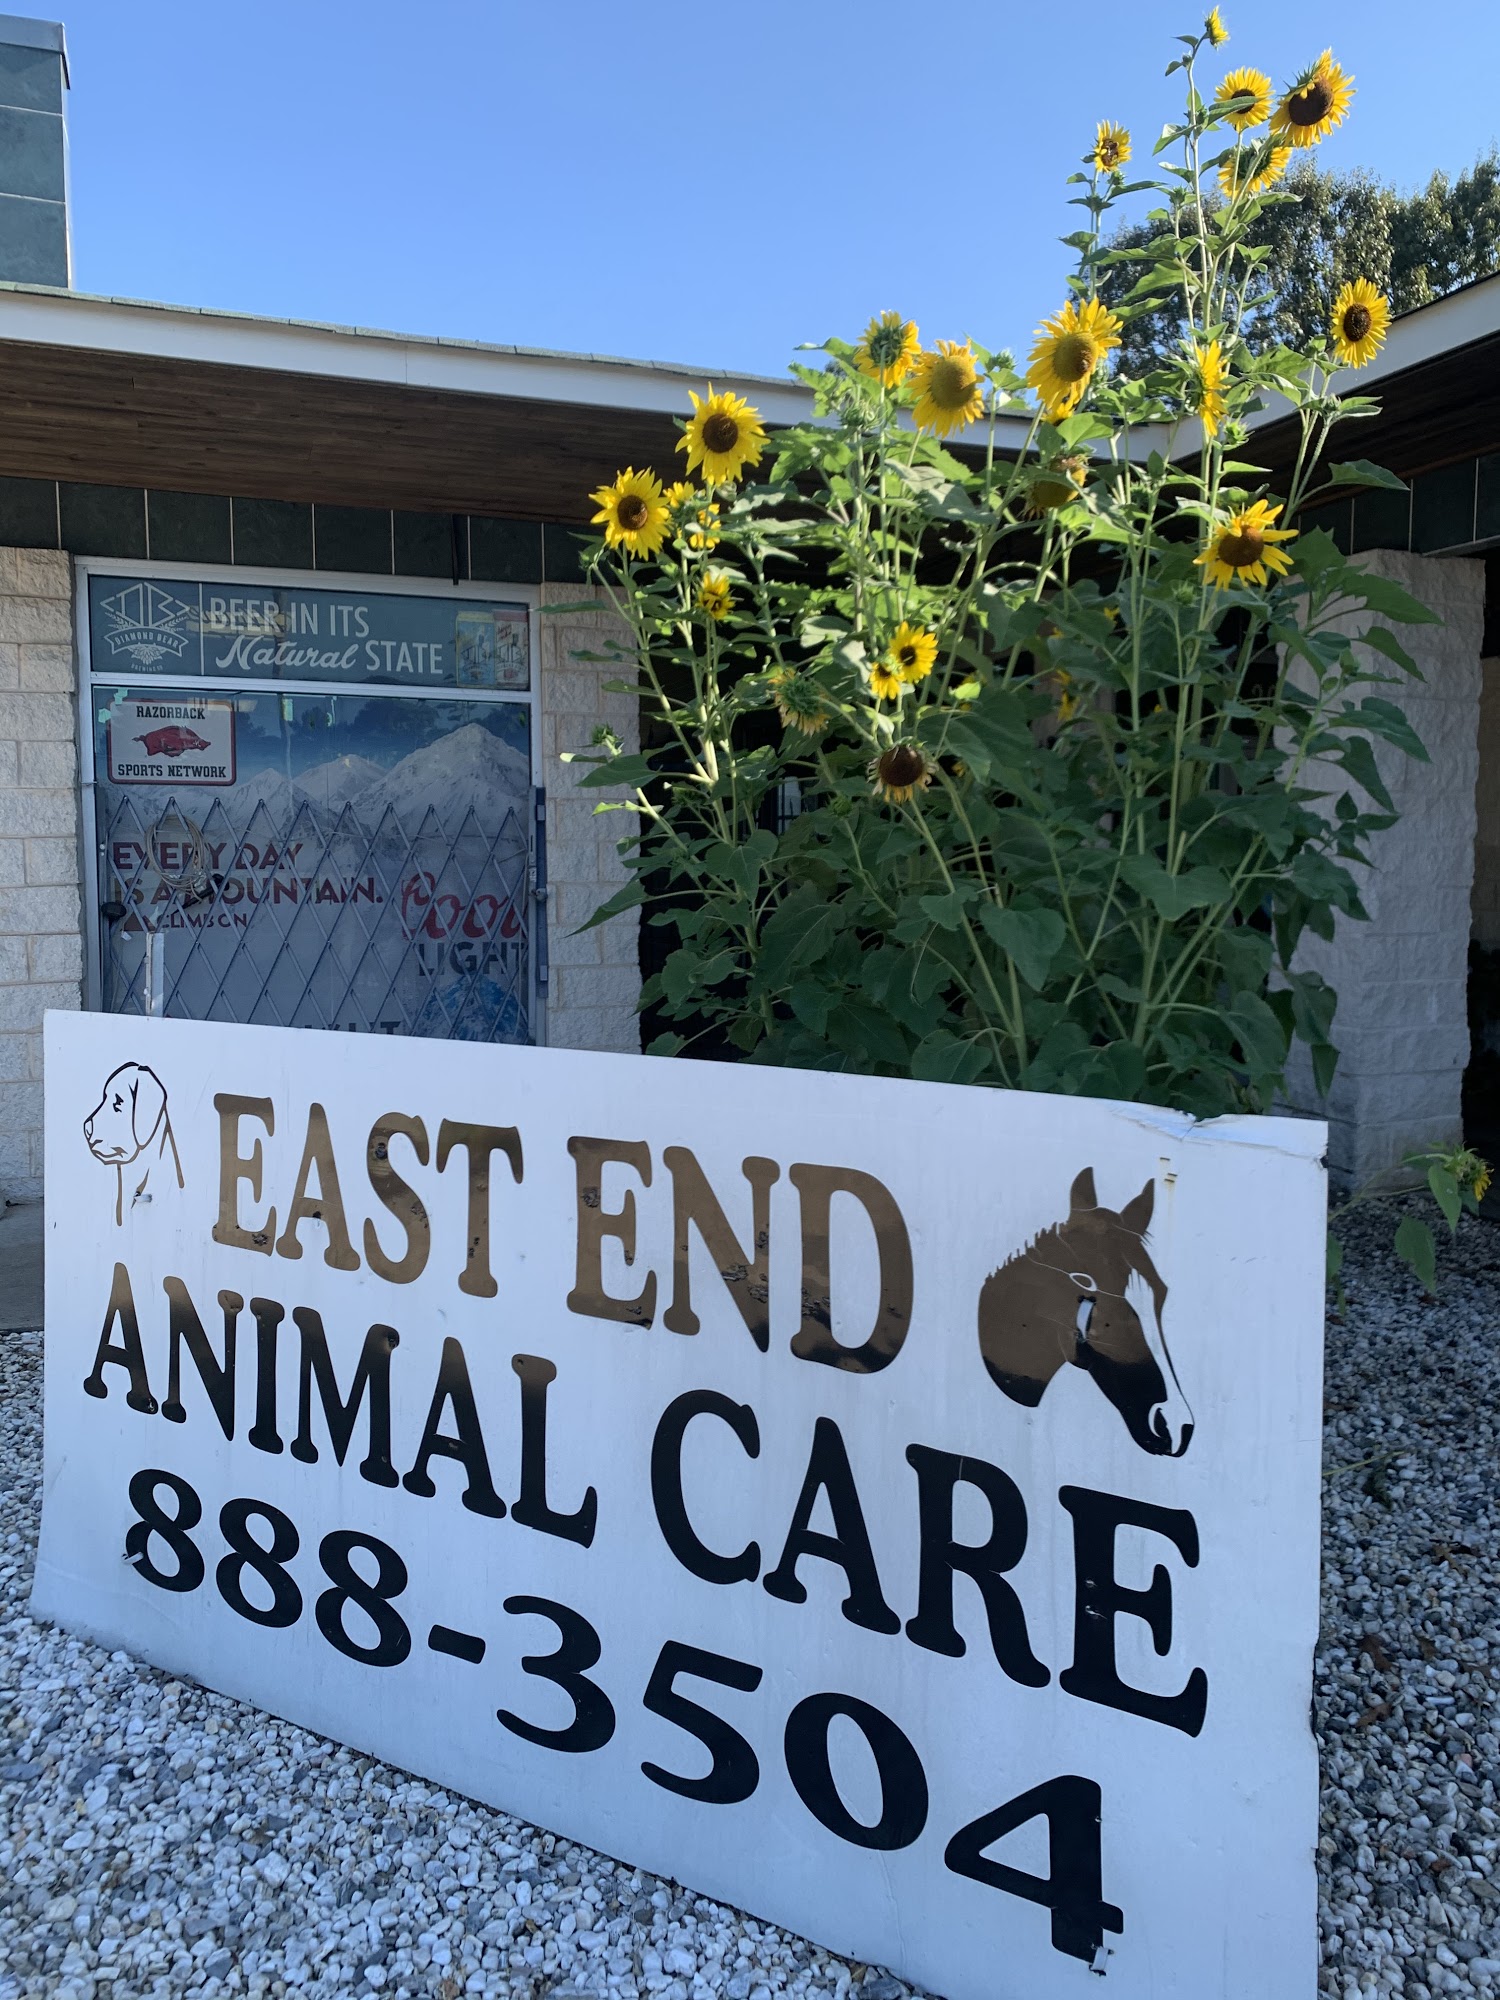 East End Animal Care